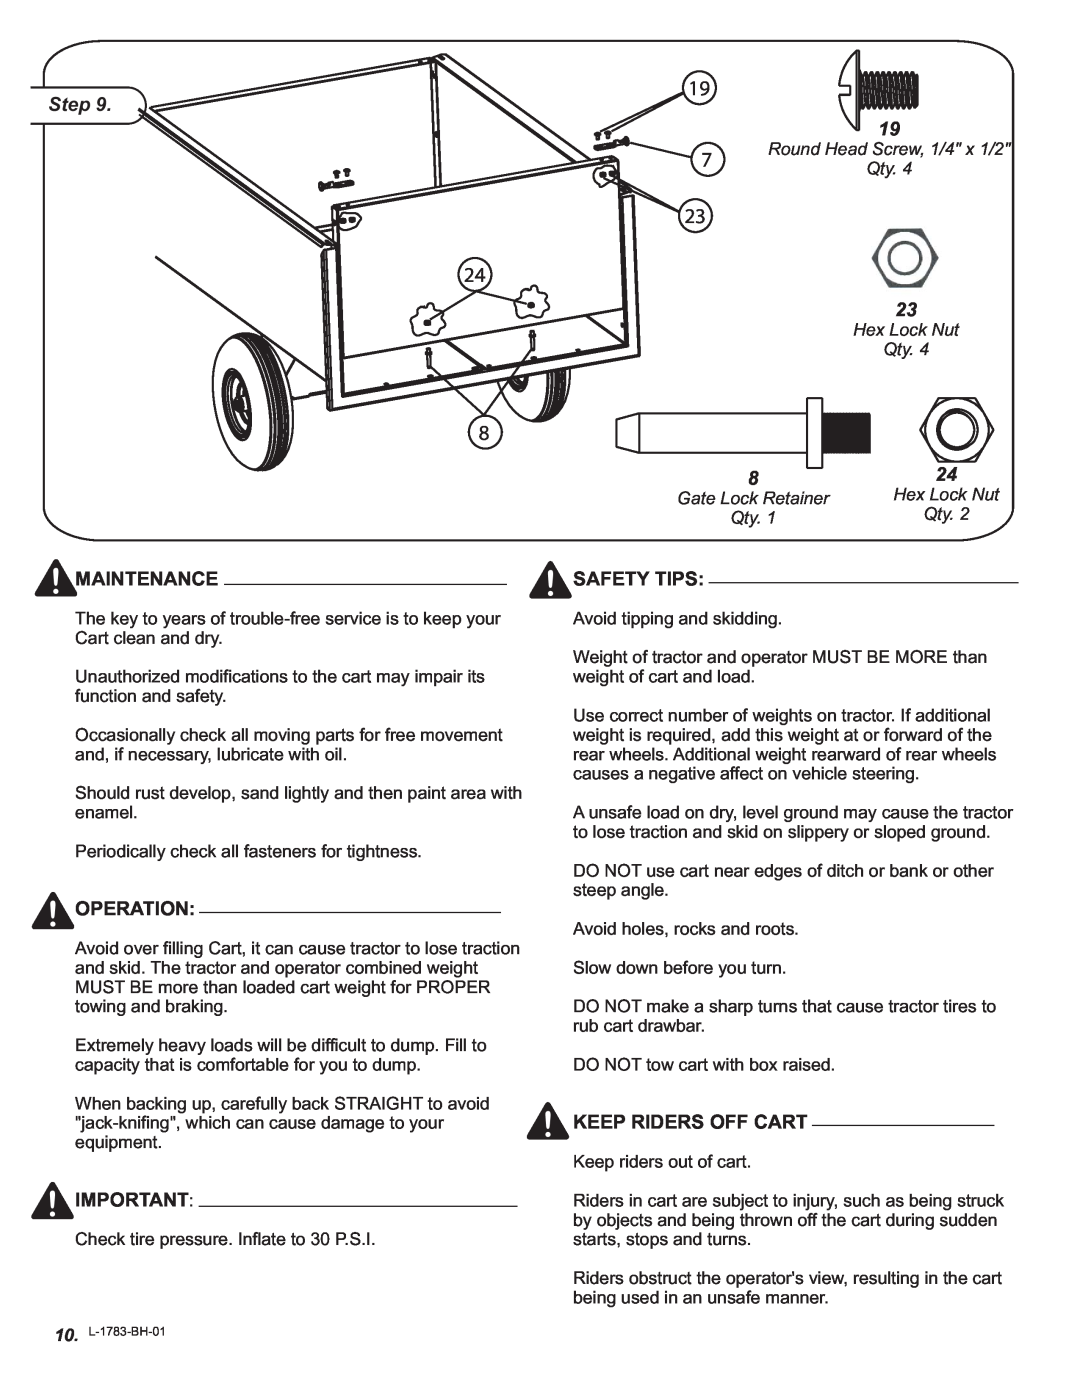 Brinly-Hardy HDC-10L BH, Tow Cart, HDC-16L BH owner manual Maintenance, Operation, Safety Tips, Keep Riders Off Cart, Step 